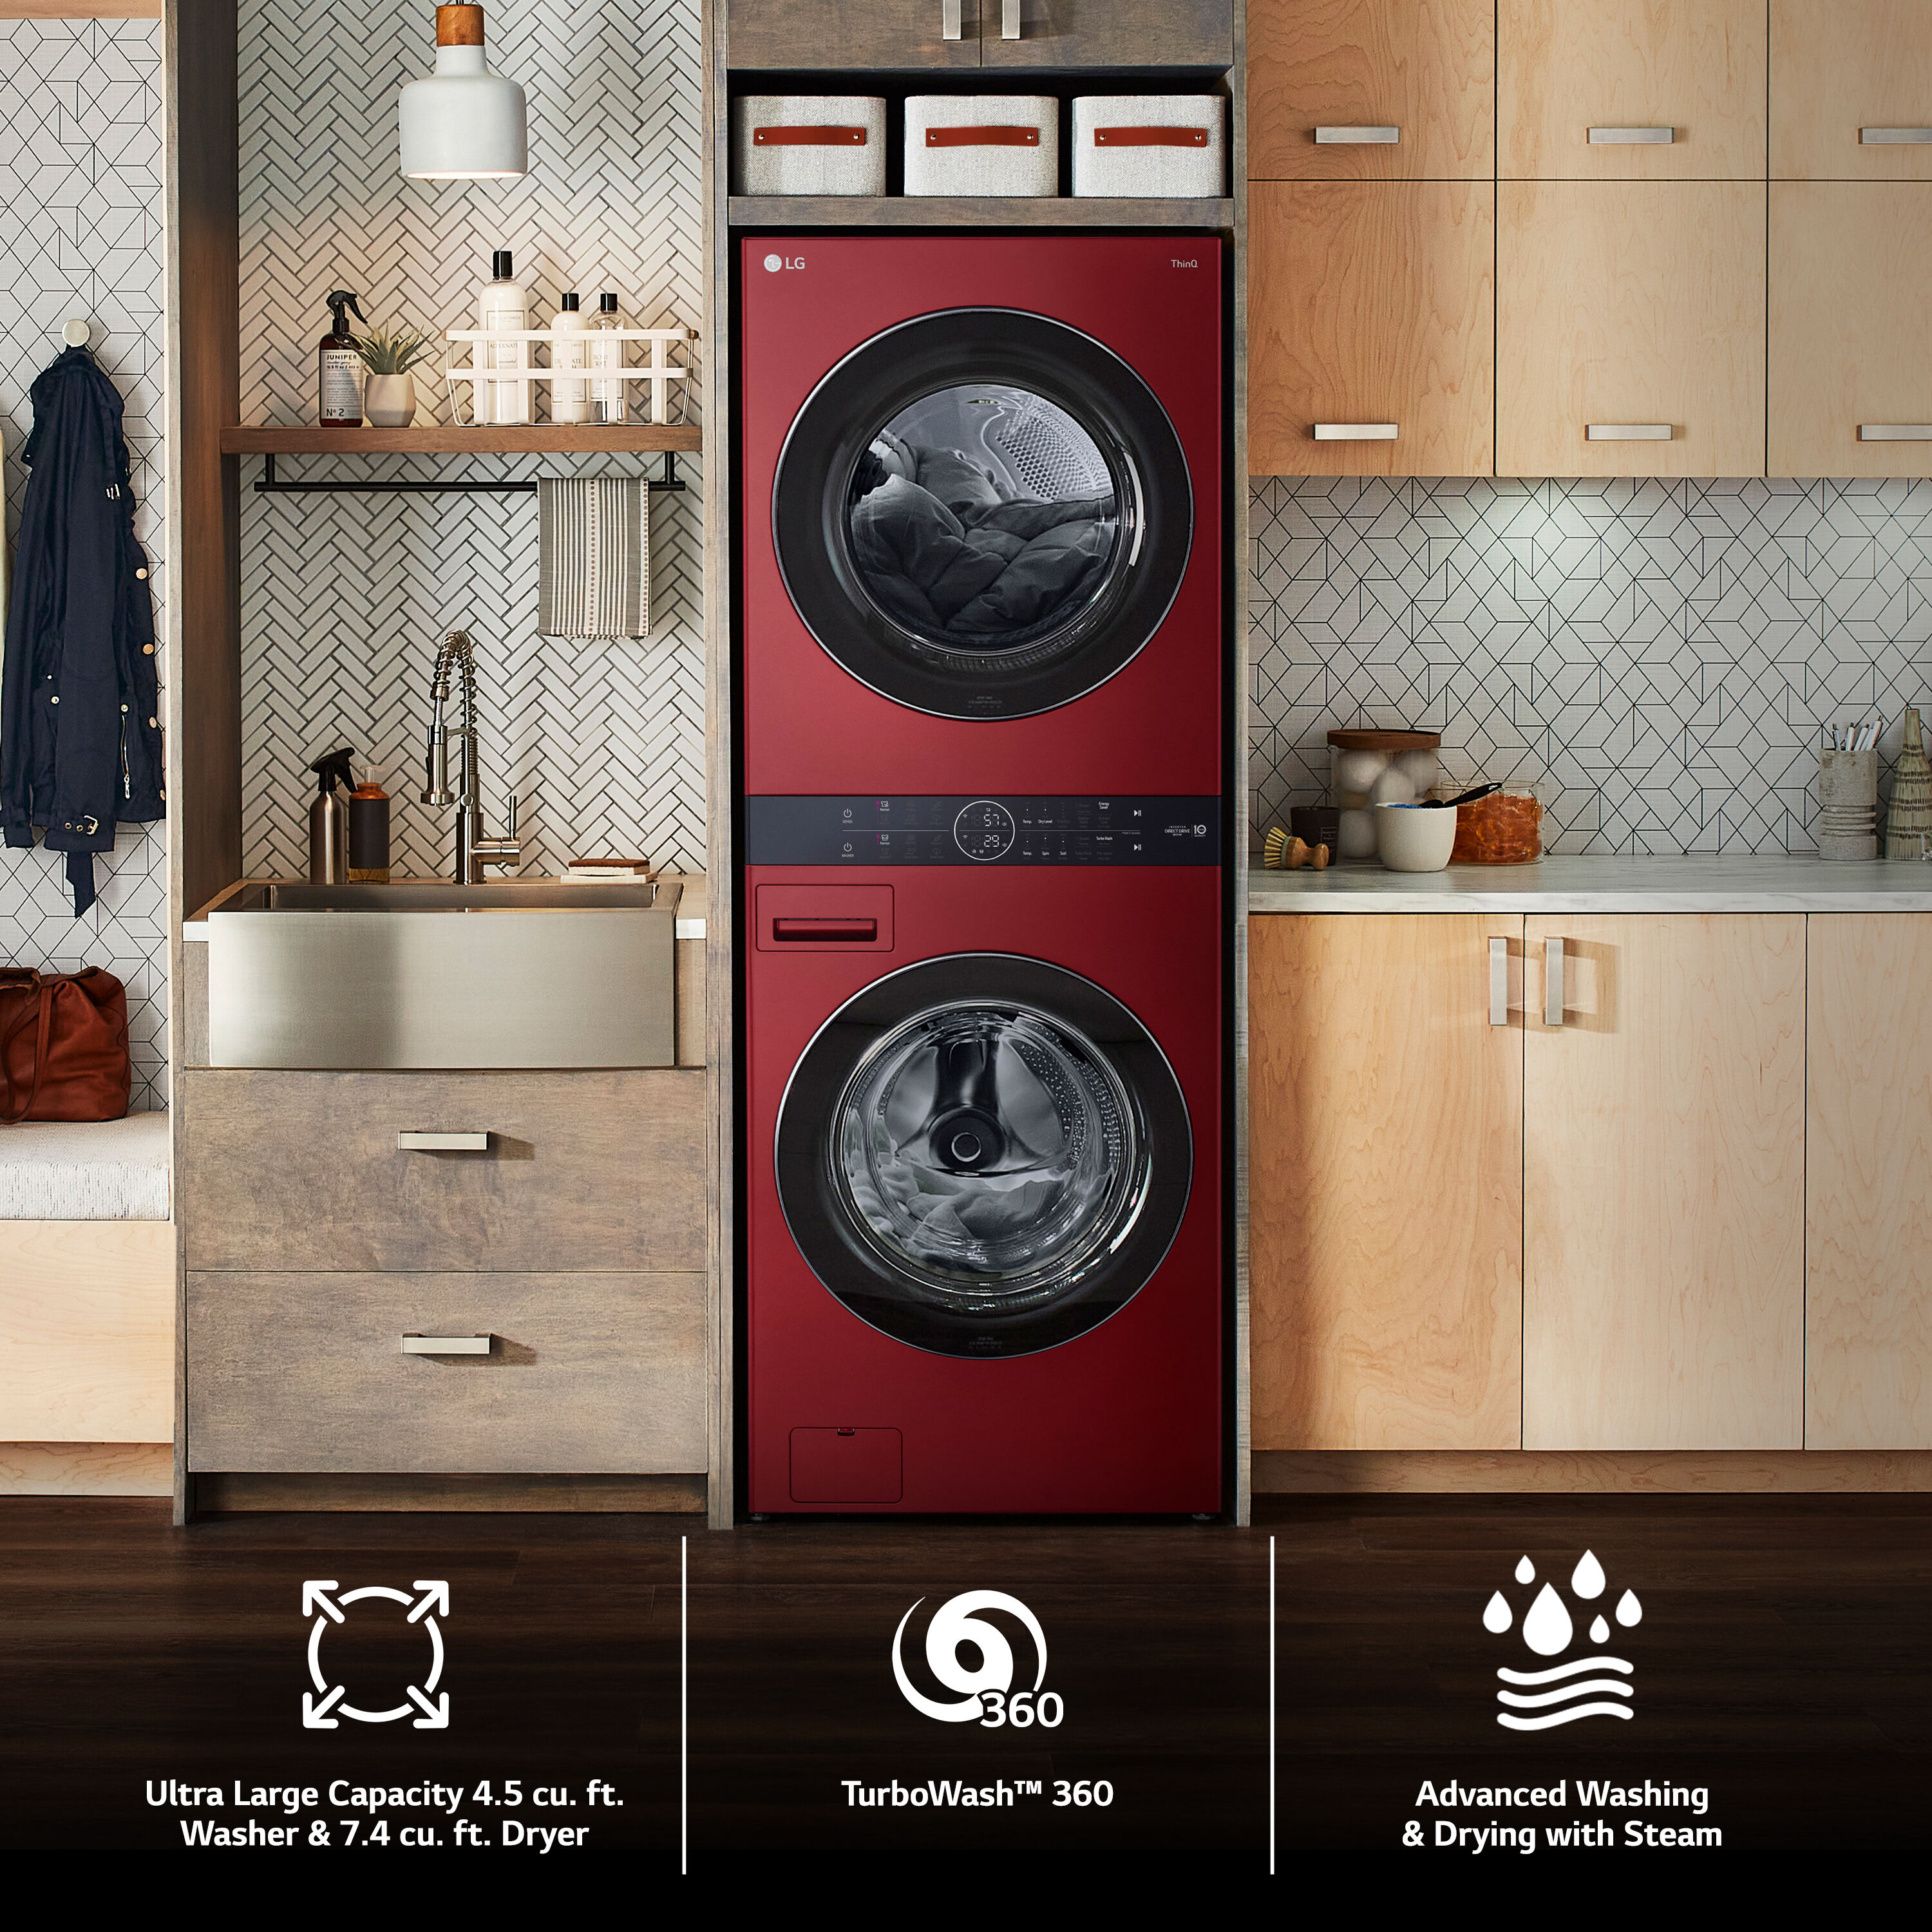 LG WashTower Electric Stacked Laundry department 7.4-cu the at Stacked and (ENERGY Washer 4.5-cu in Center Dryer Laundry ft Centers STAR) with ft